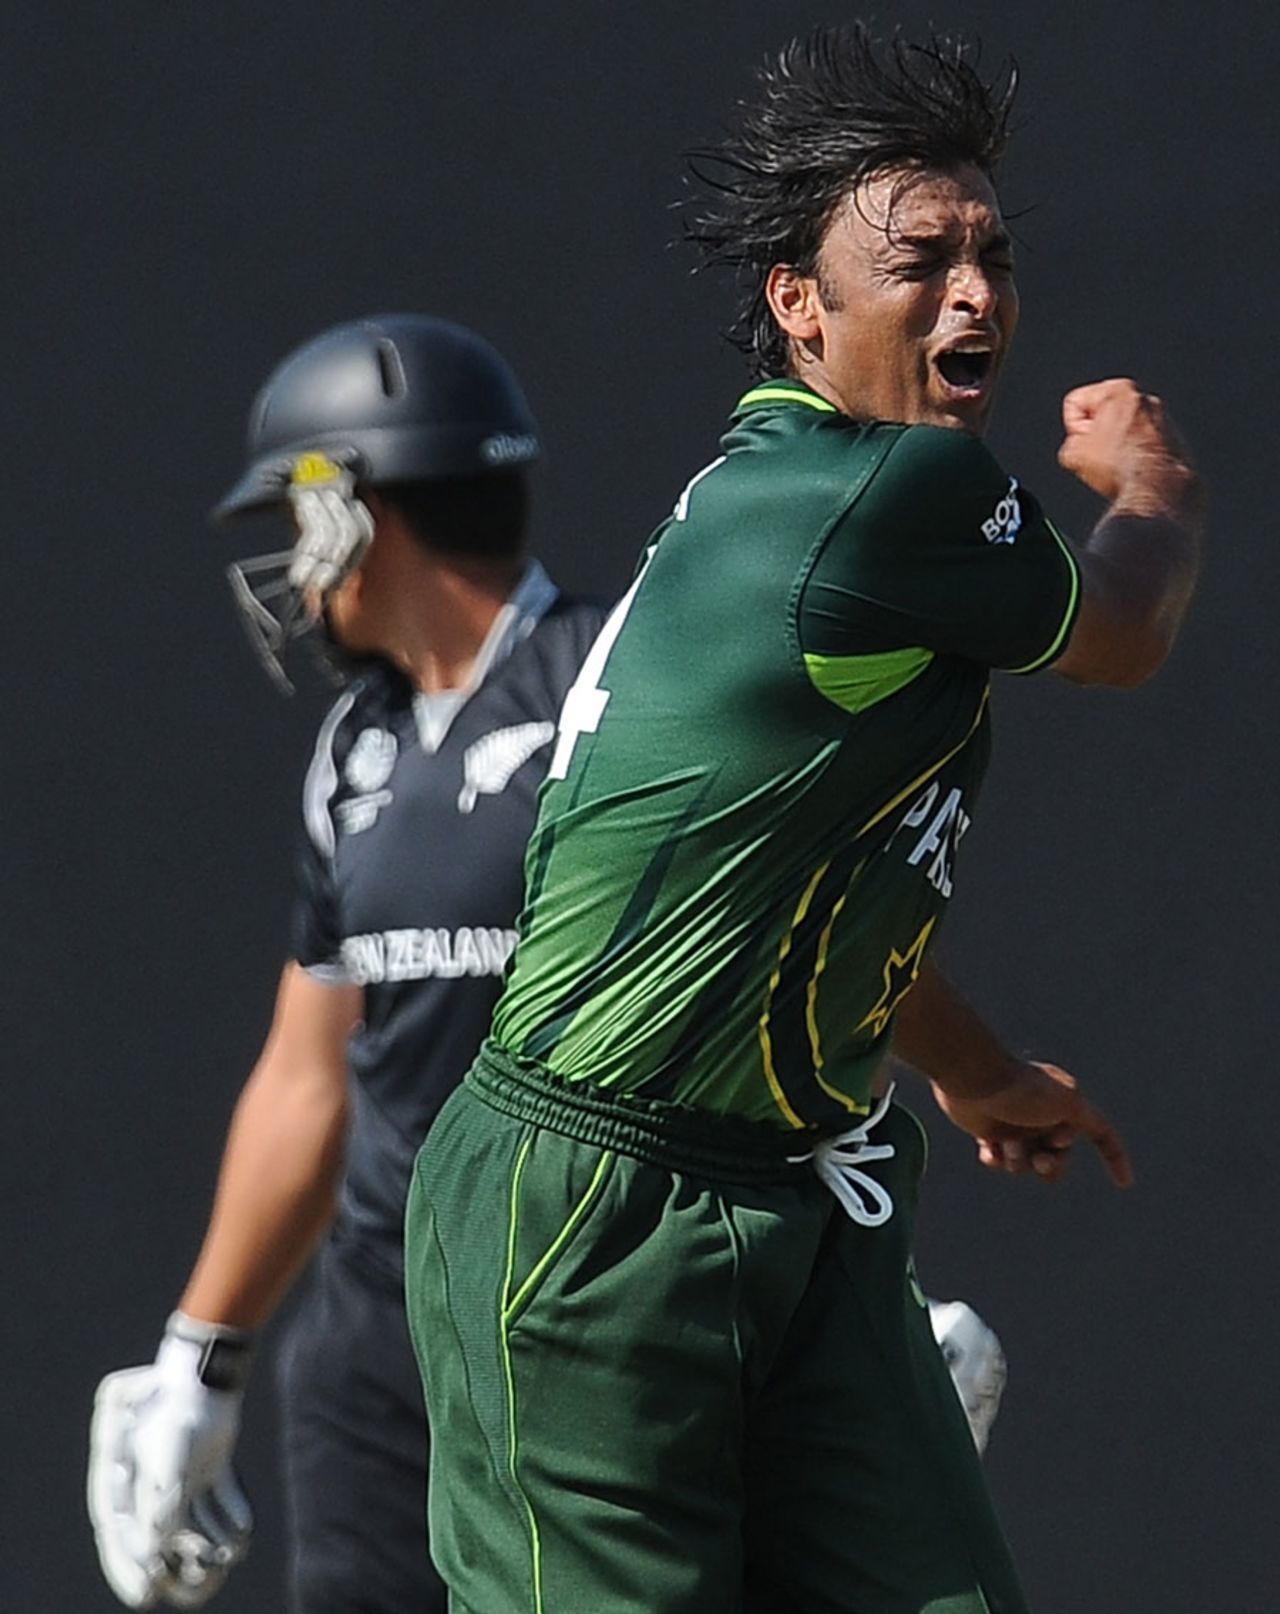 Shoaib Akhtar erupts after Kamran Akmal dropped Ross Taylor behind the stumps, New Zealand v Pakistan, Group A, World Cup, Pallekele, March 8, 2011